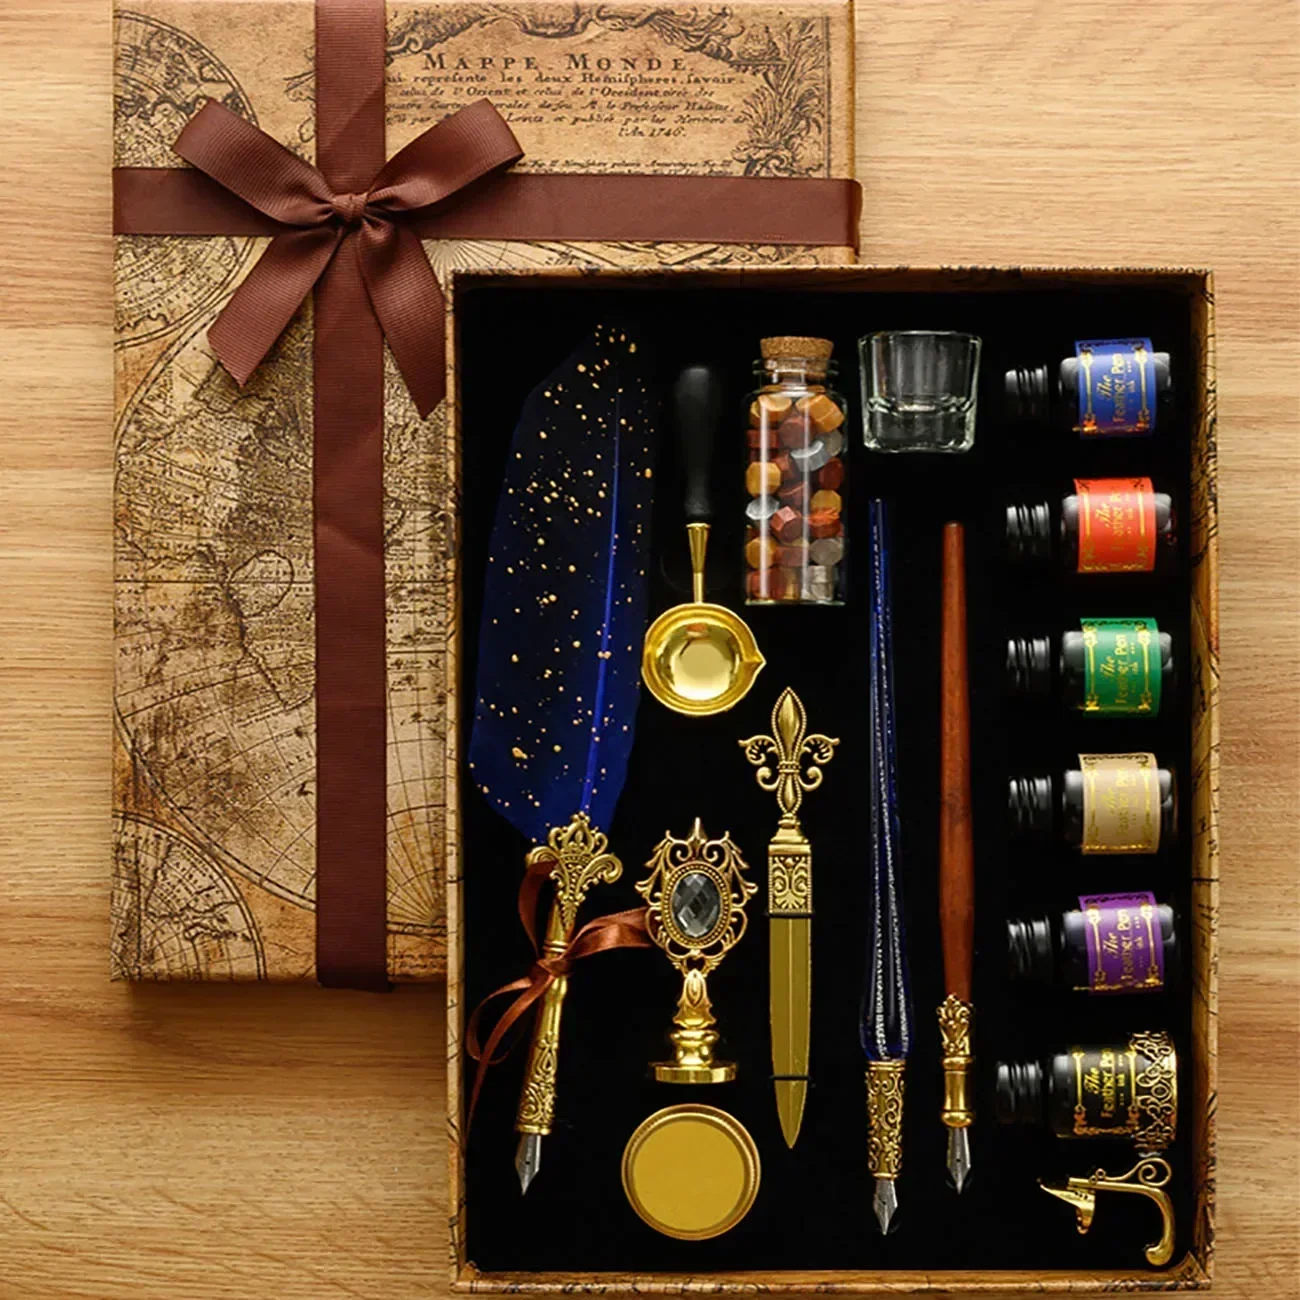 Cheap Pen Wax Seal Stamp Kit Feather Quill Pen and Ink Set Calligraphy  Writing Dip Pen Birthday Gift